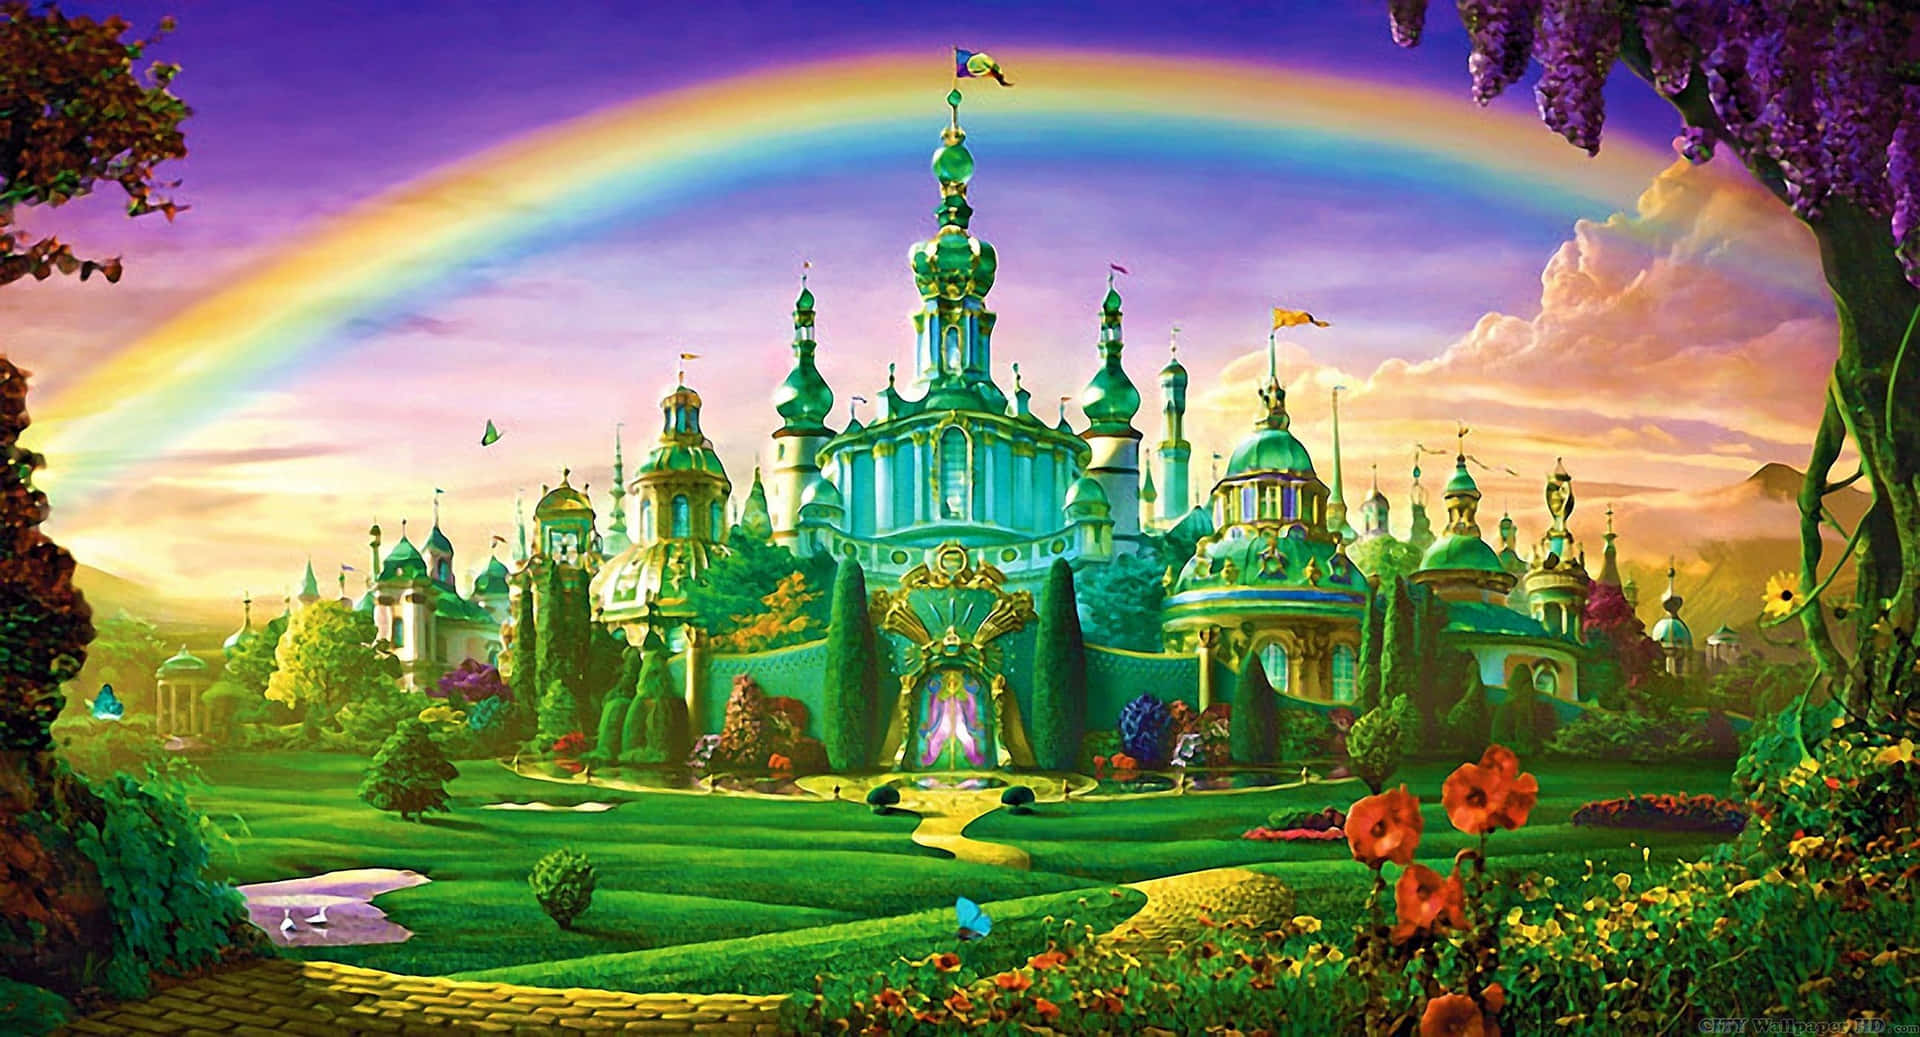 A Rainbow And A Castle In The Middle Of A Field Wallpaper